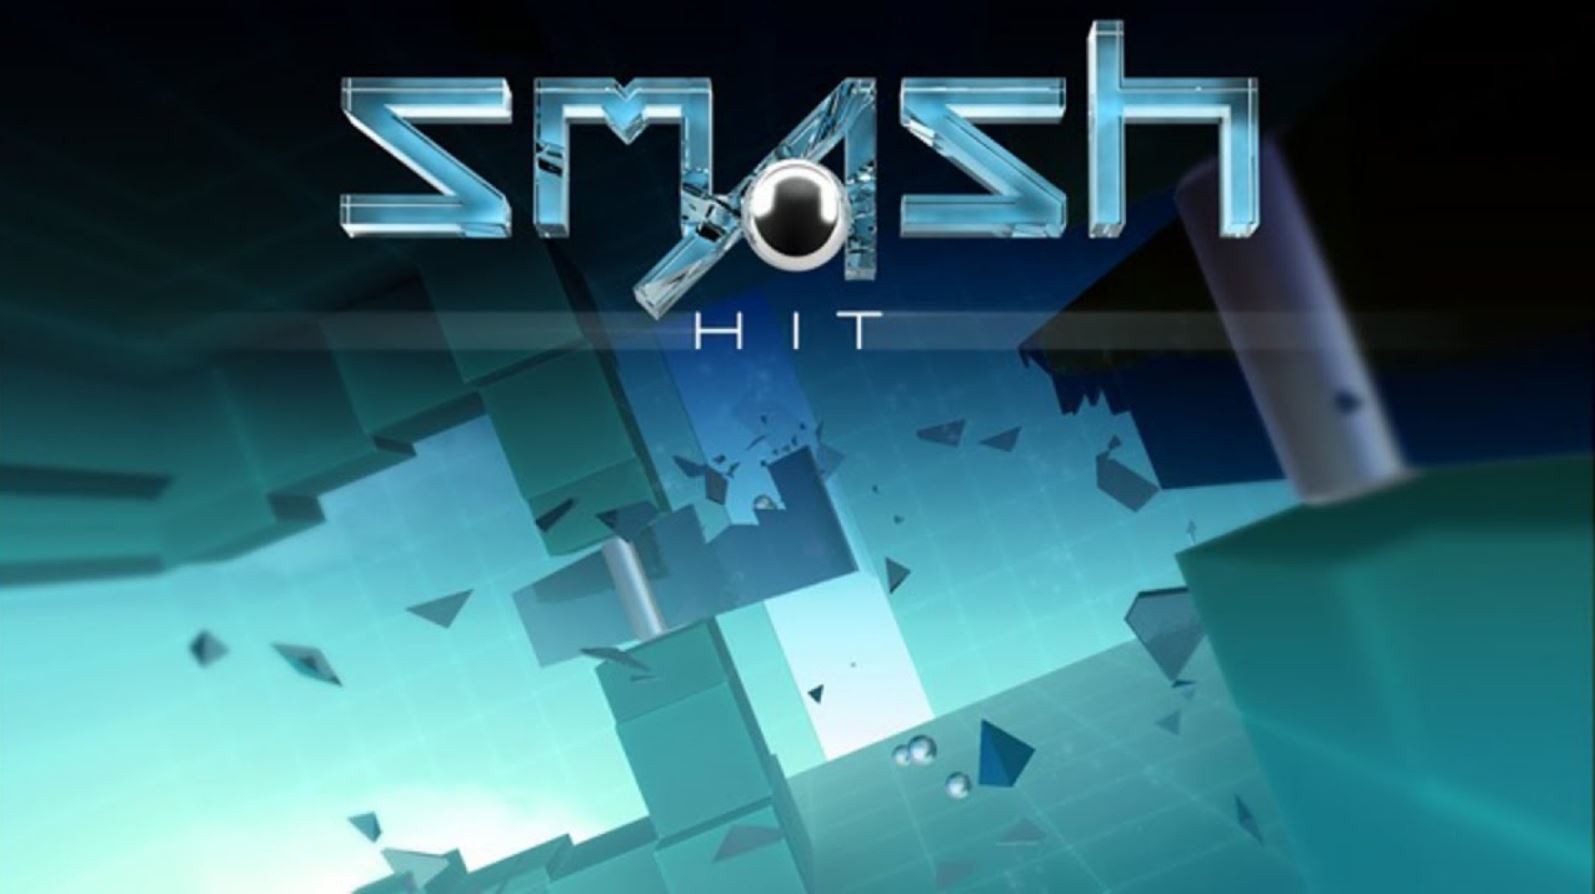 Smash Hit a game where you break glass structures